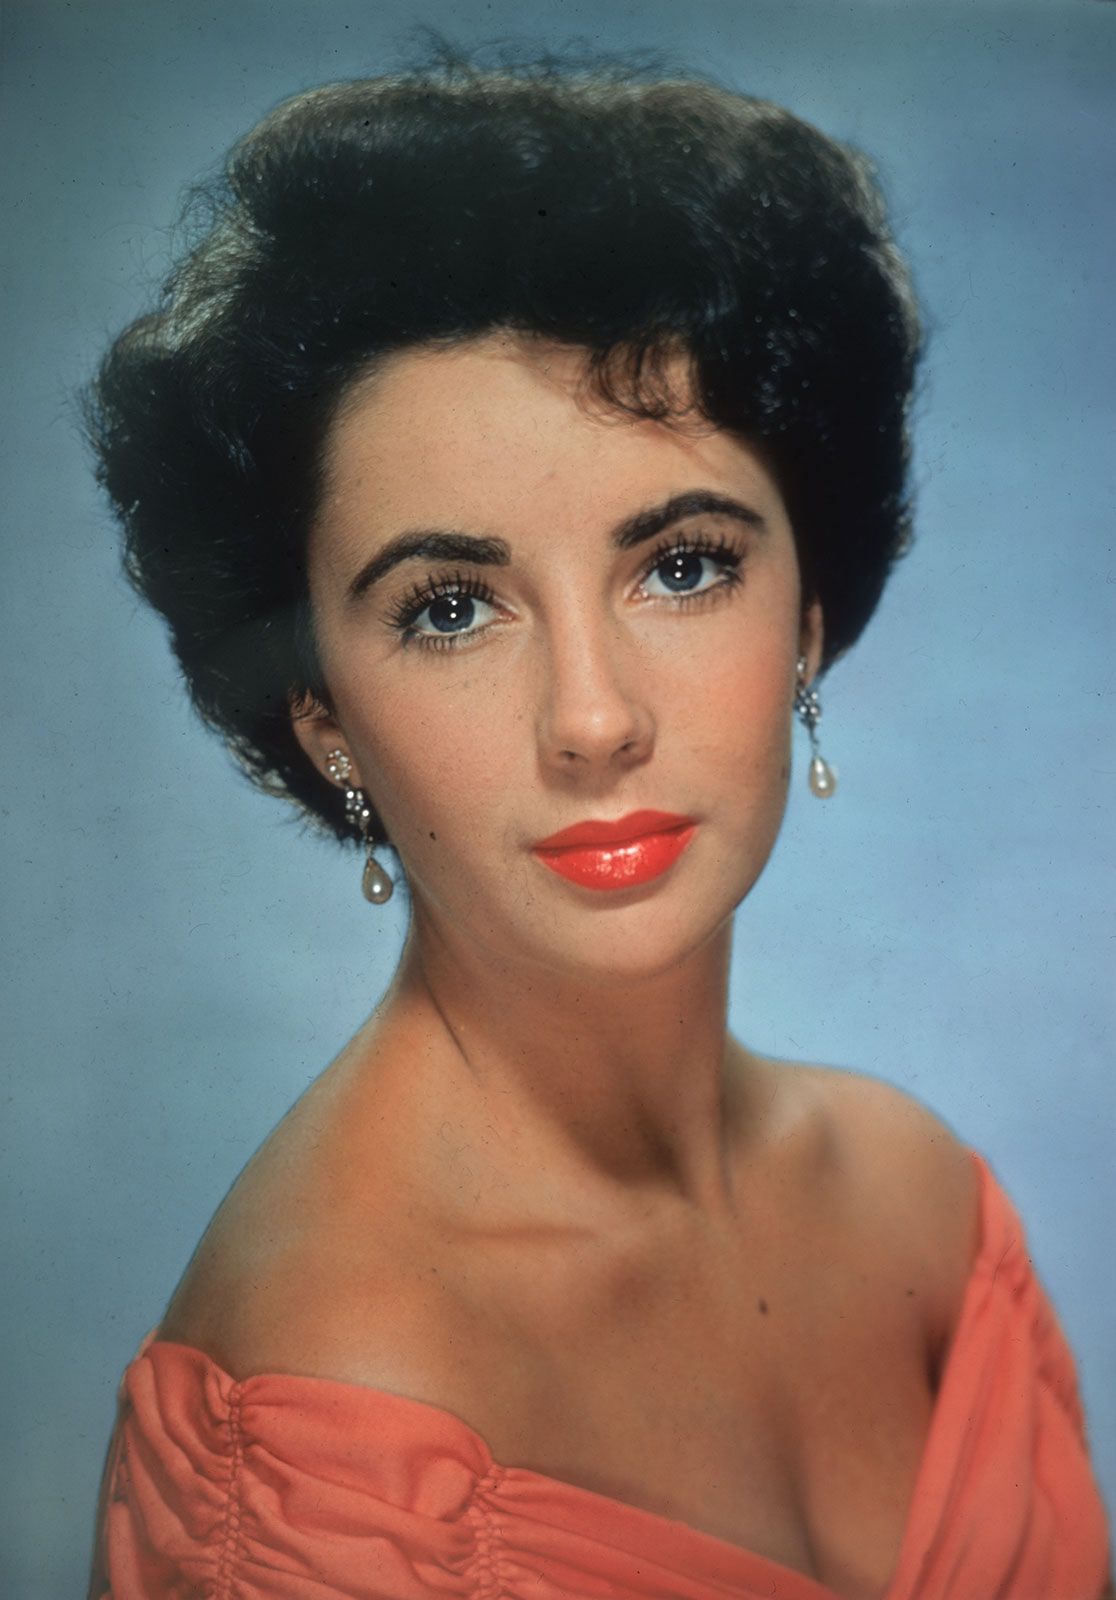 Capable rival to Ross - The divorce force: Elizabeth Taylor